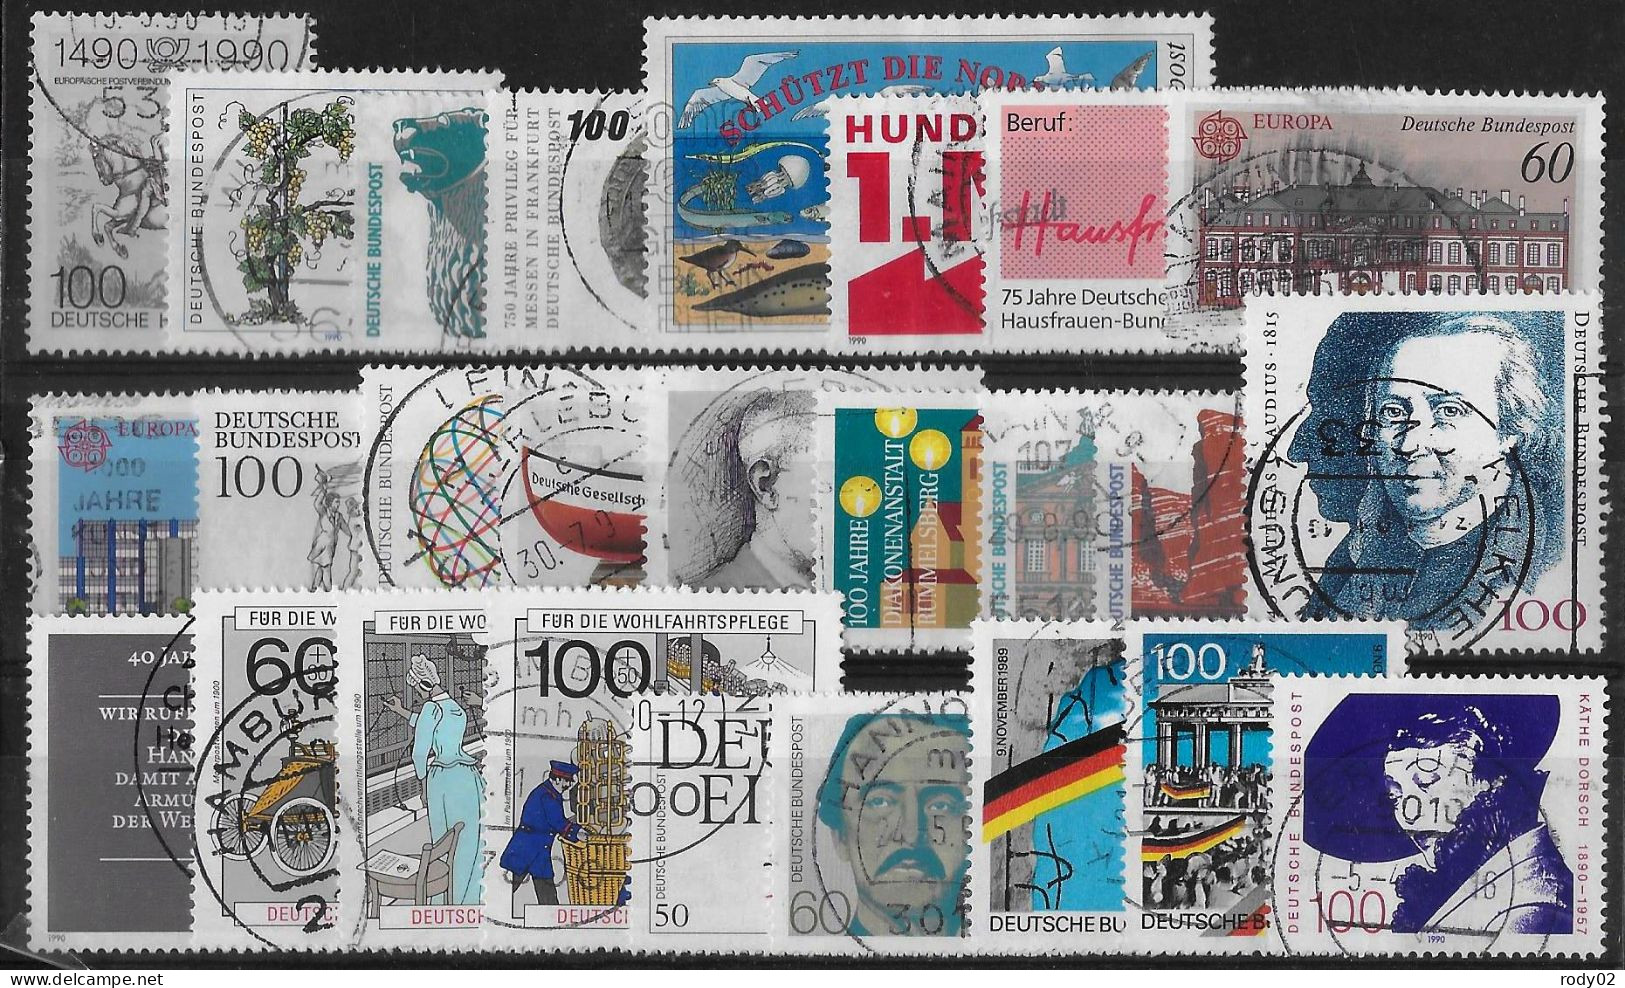 ALLEMAGNE REPUBLIQUE FEDERALE - ANNEE 1990 - 26 VALEURS - OBLITERES - TOUS DIFFERENTS - Used Stamps